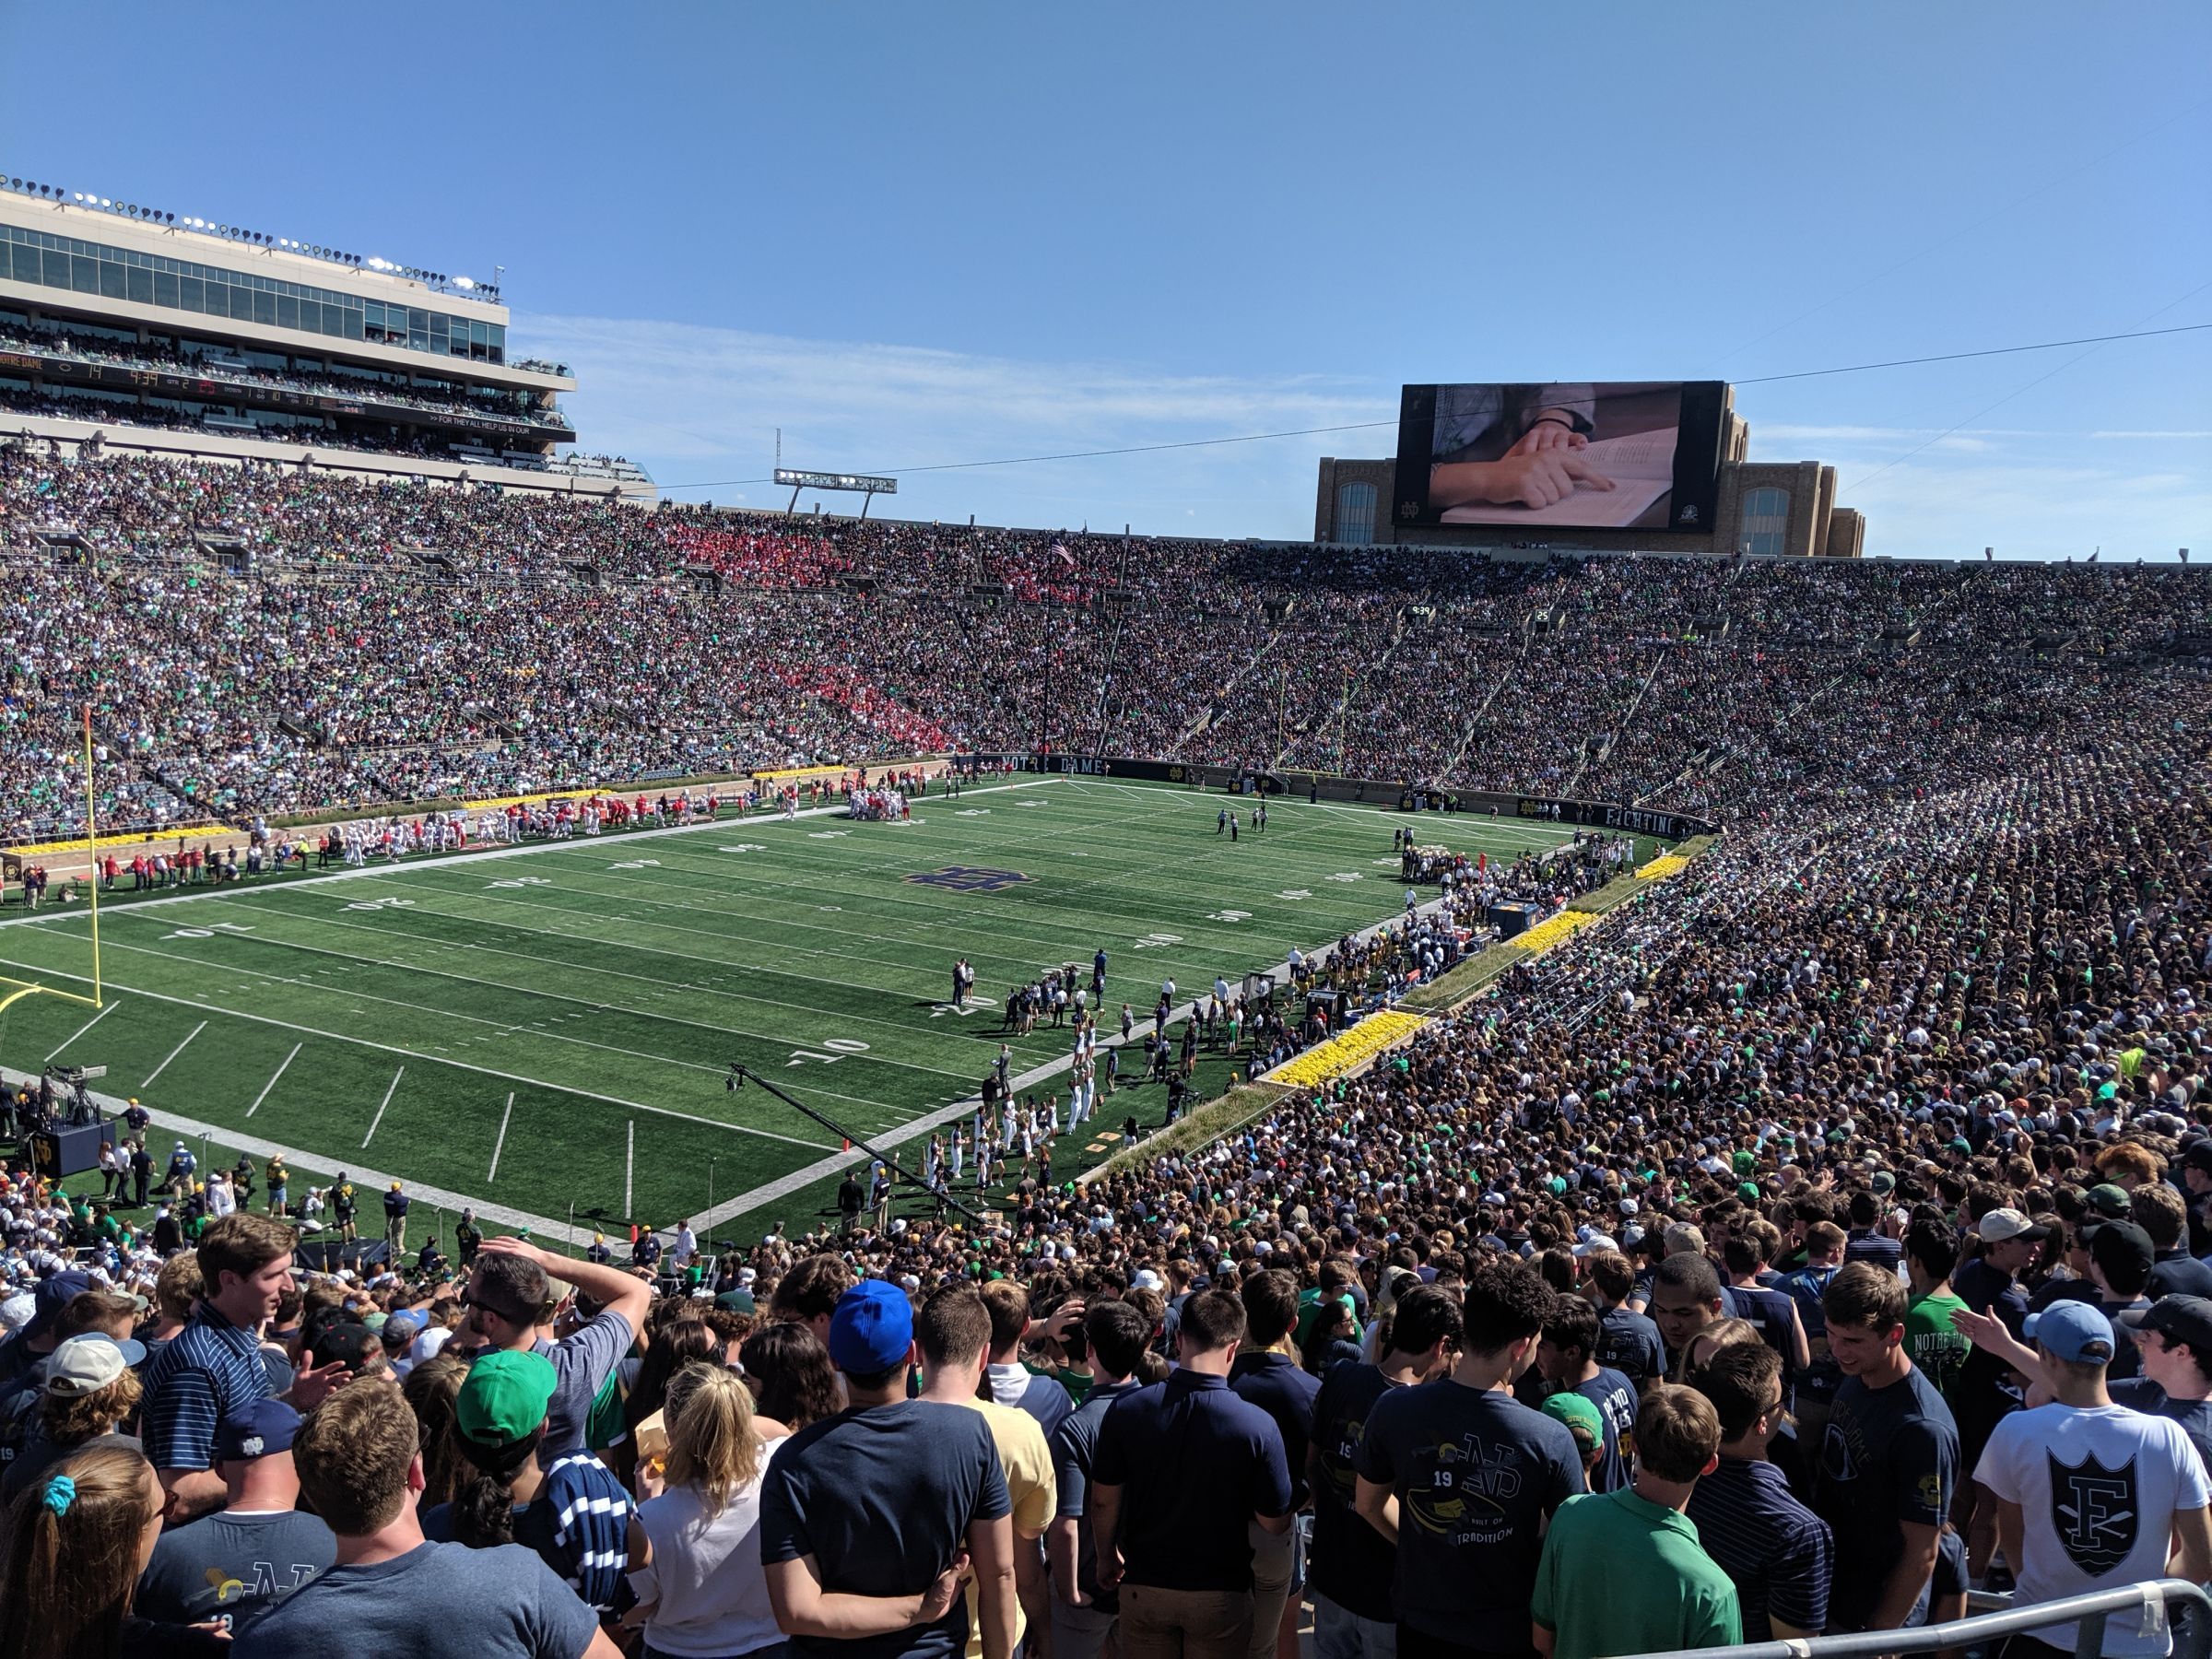 section 133, row 4 seat view  - notre dame stadium